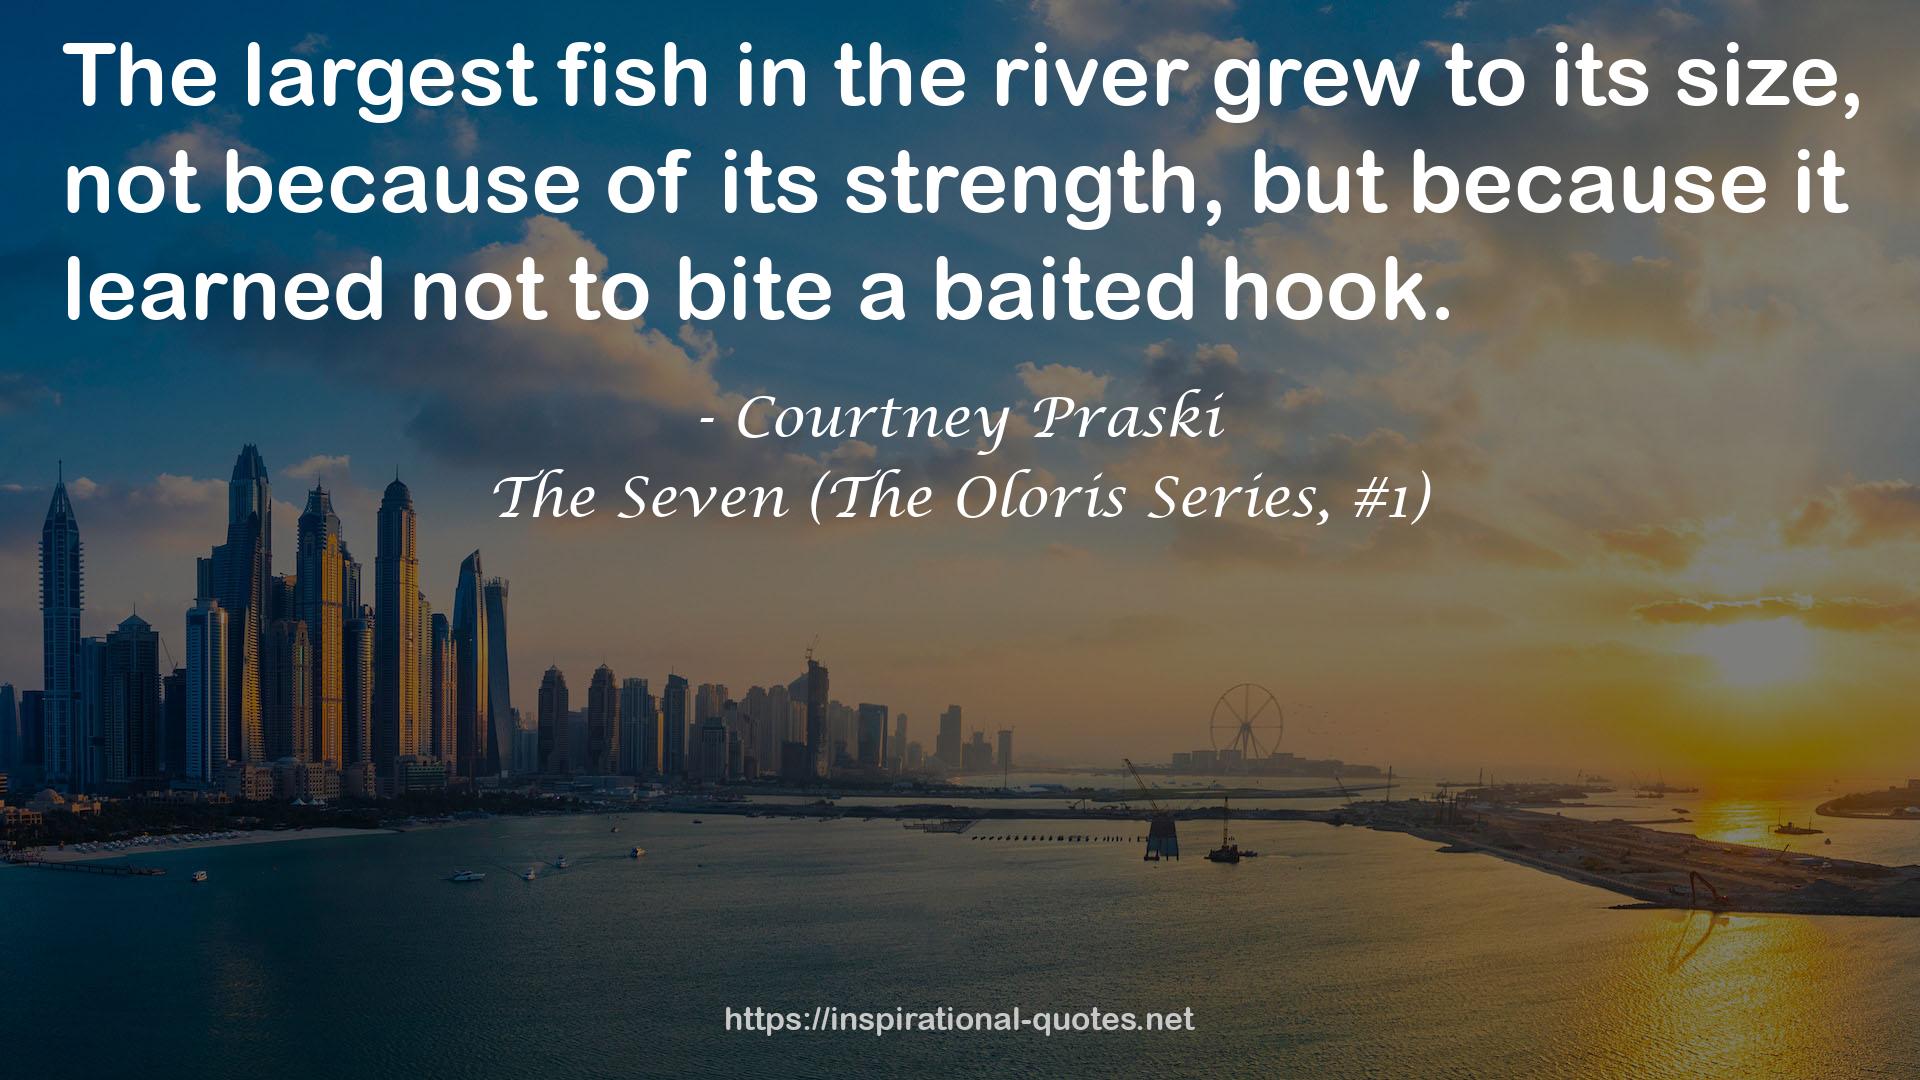 The Seven (The Oloris Series, #1) QUOTES